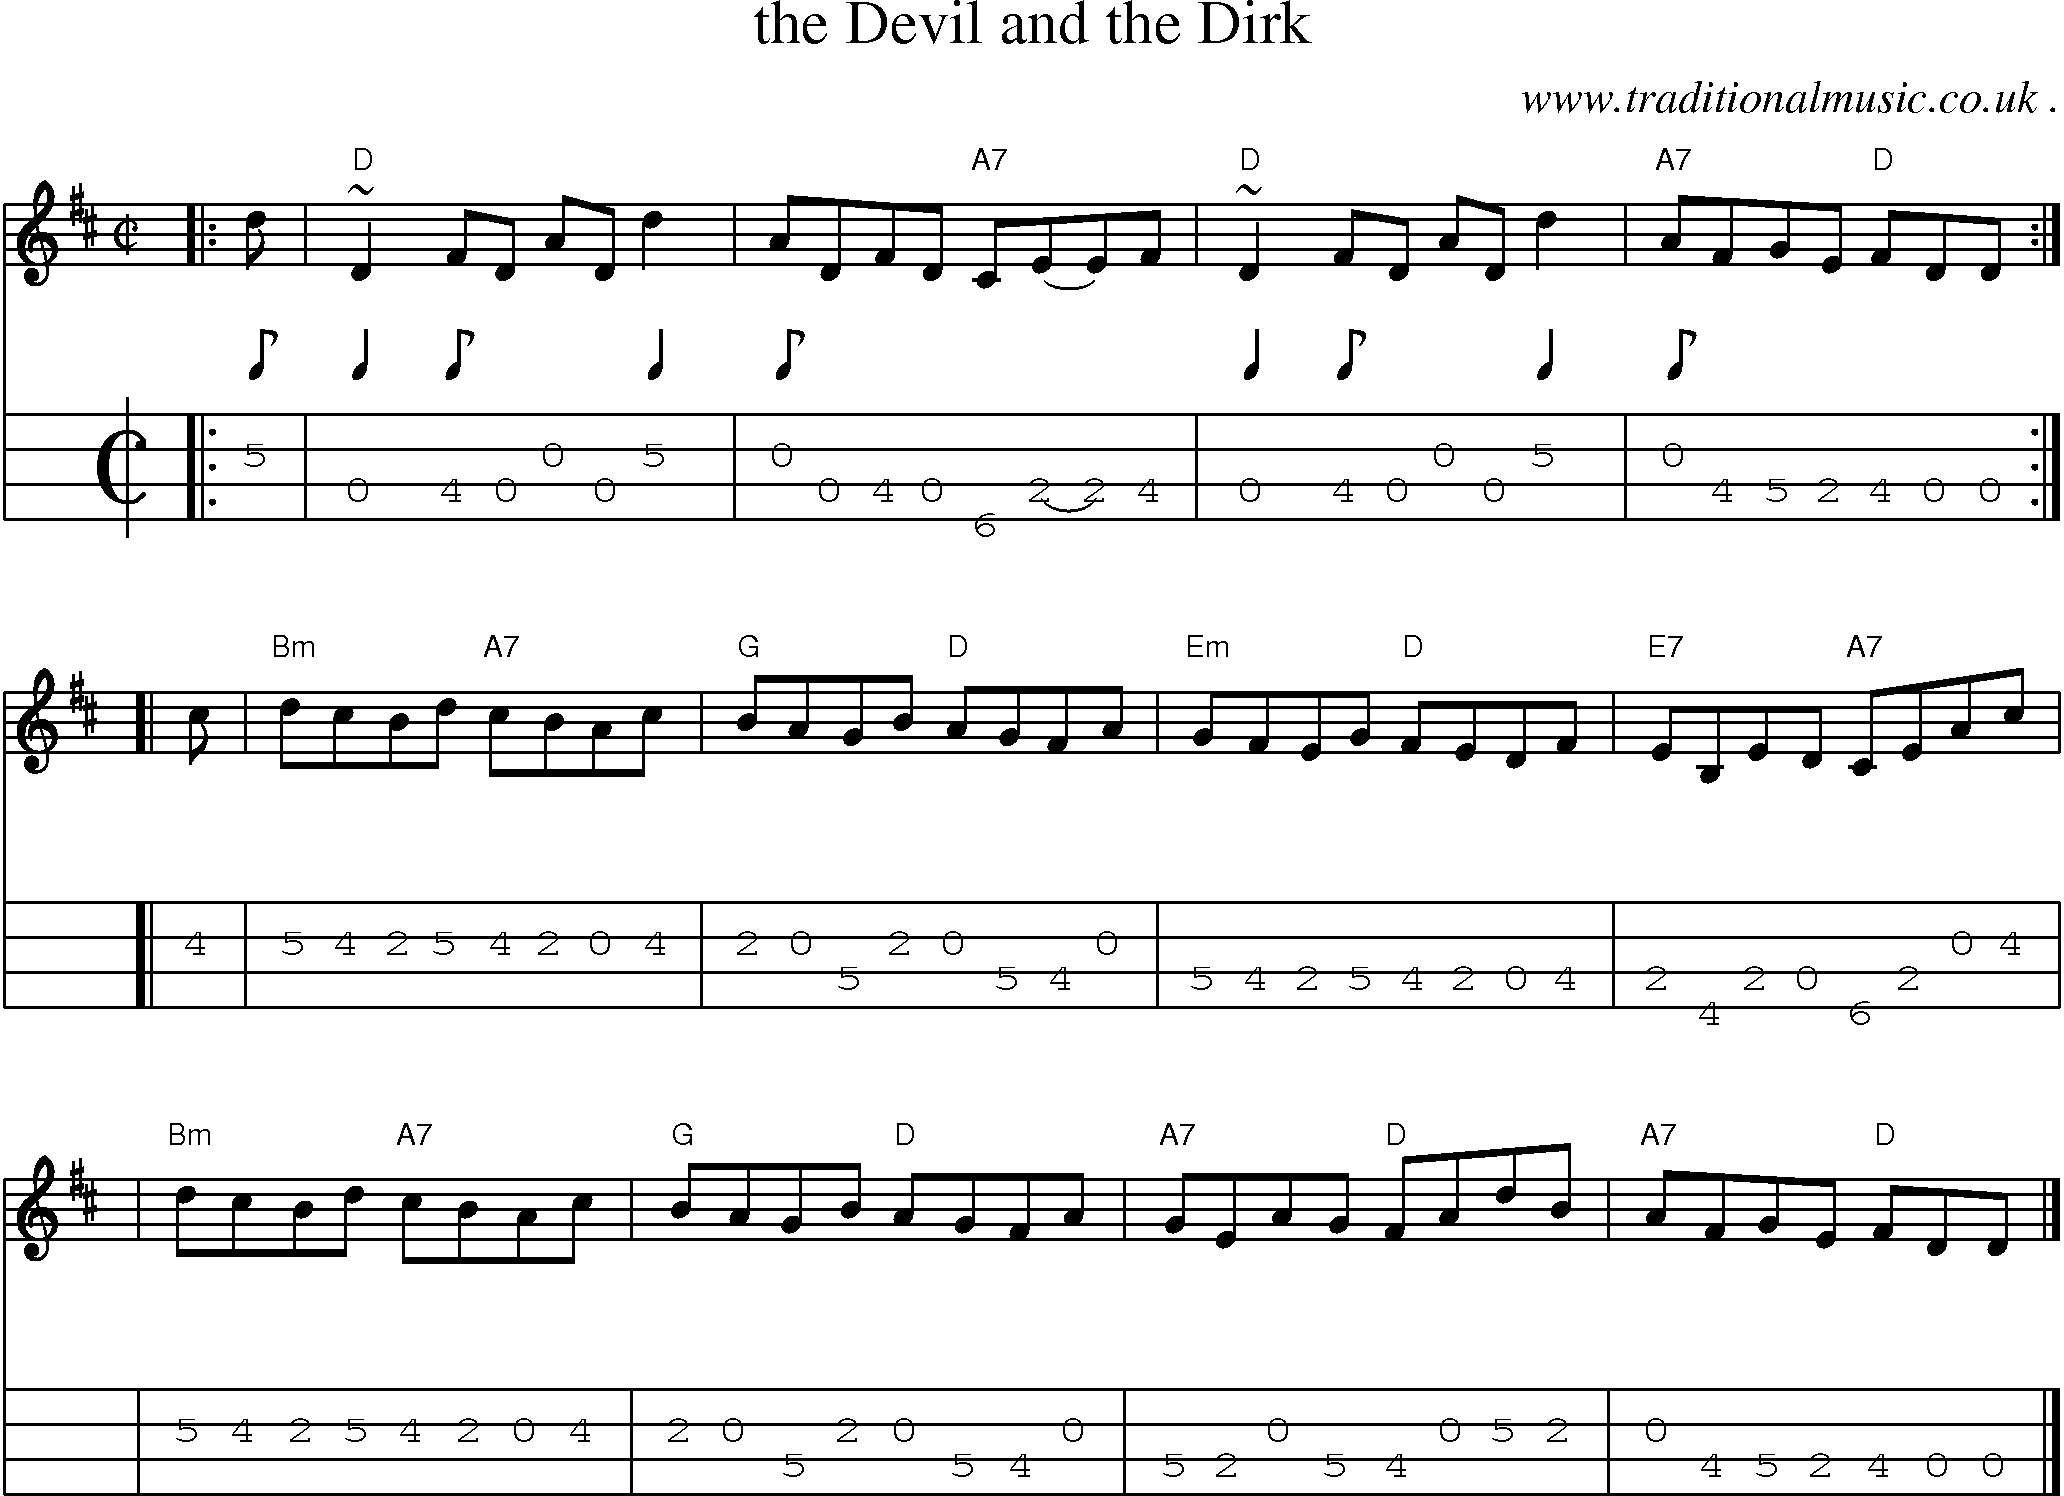 Sheet-music  score, Chords and Mandolin Tabs for The Devil And The Dirk